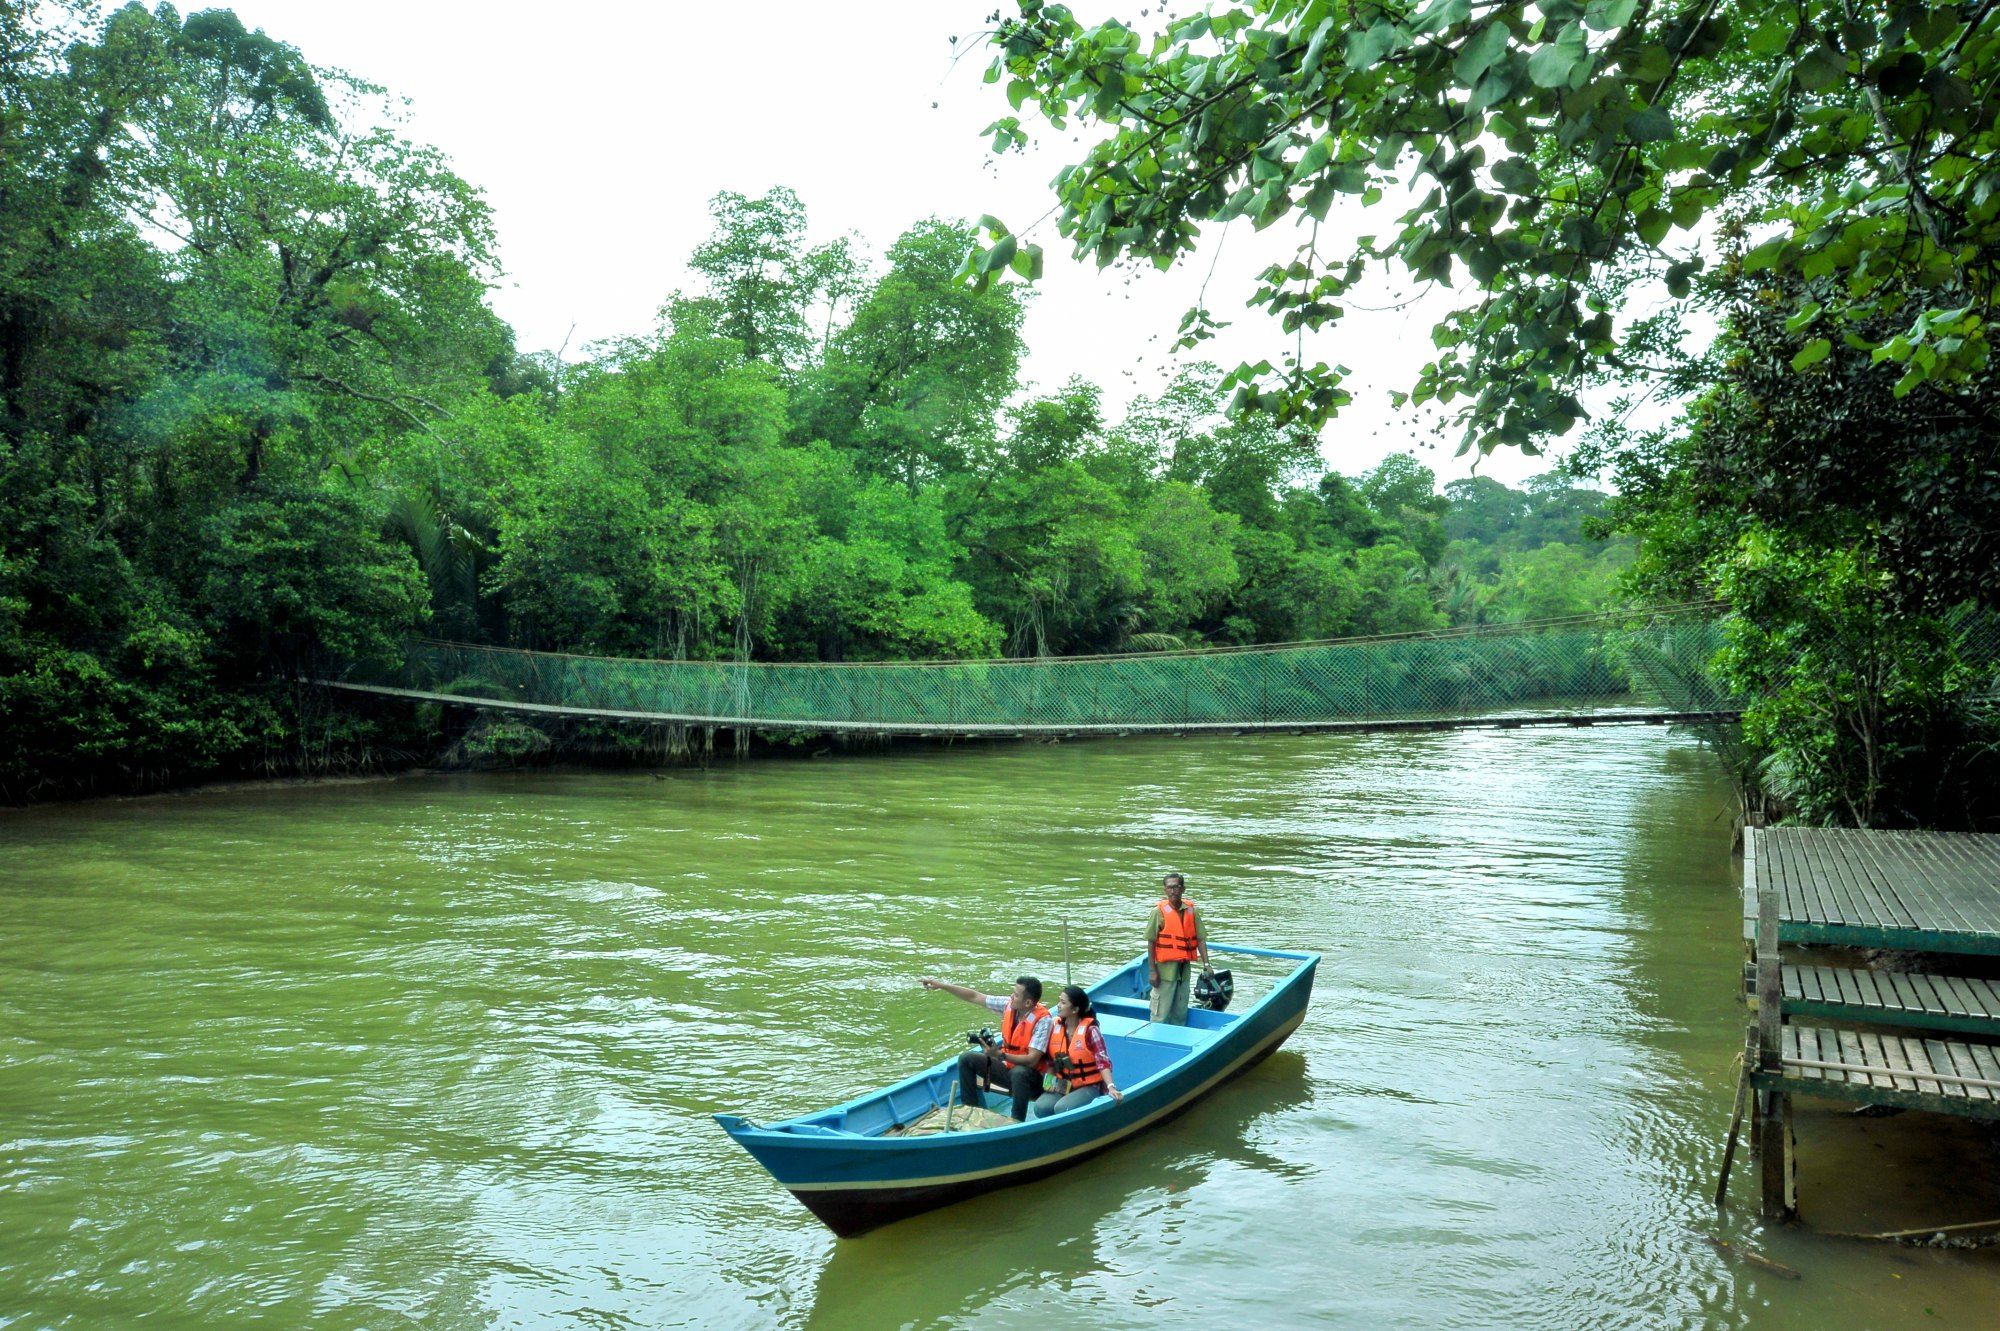 Check out: All the nature-related things to do in Bintulu, Sarawak